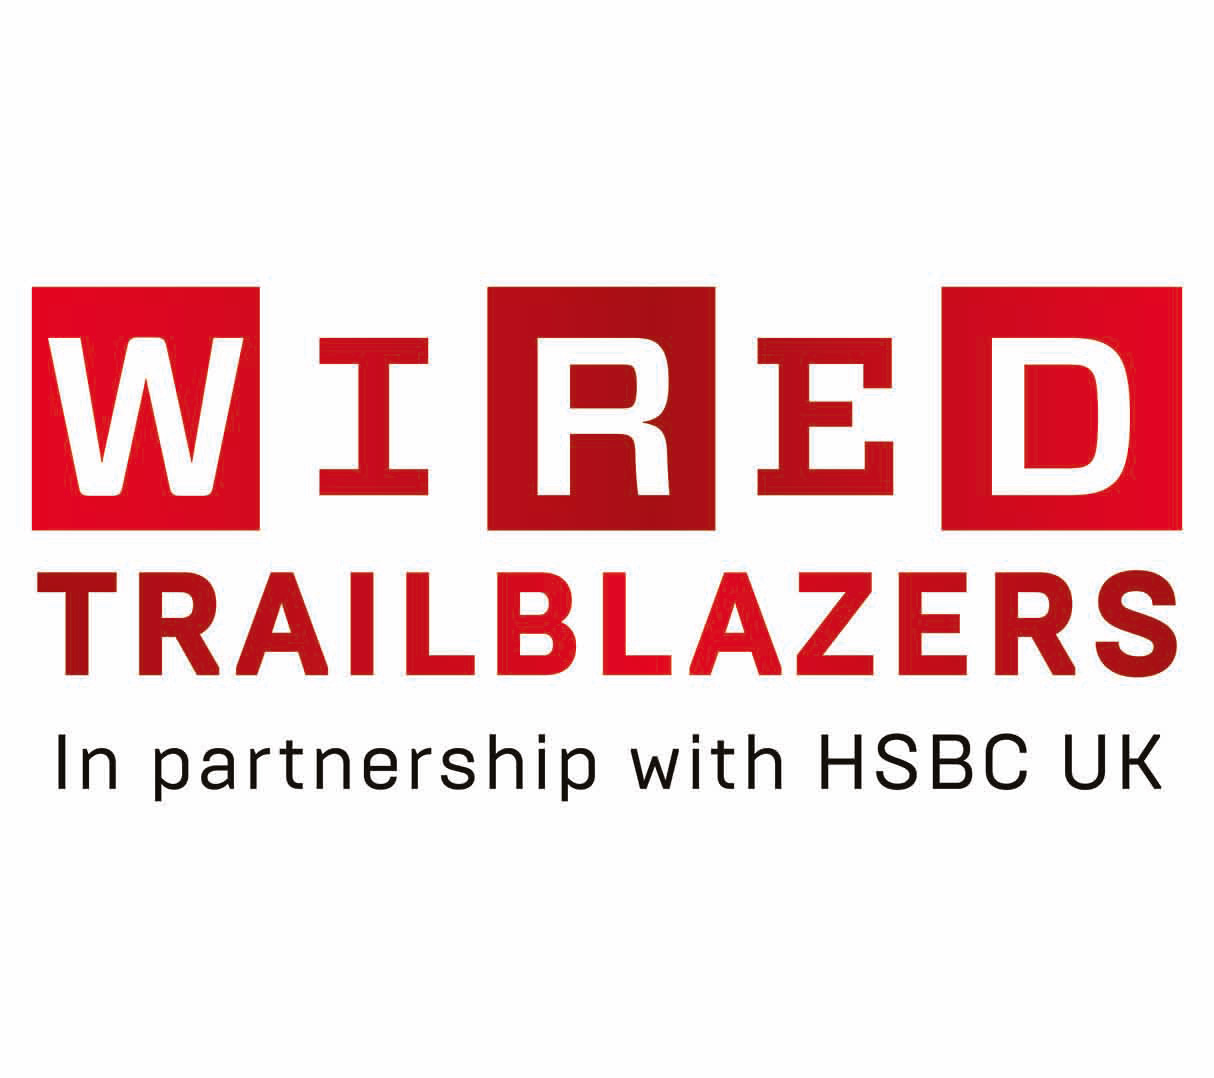 Wired trailblasers in partnership with HSBC UK 